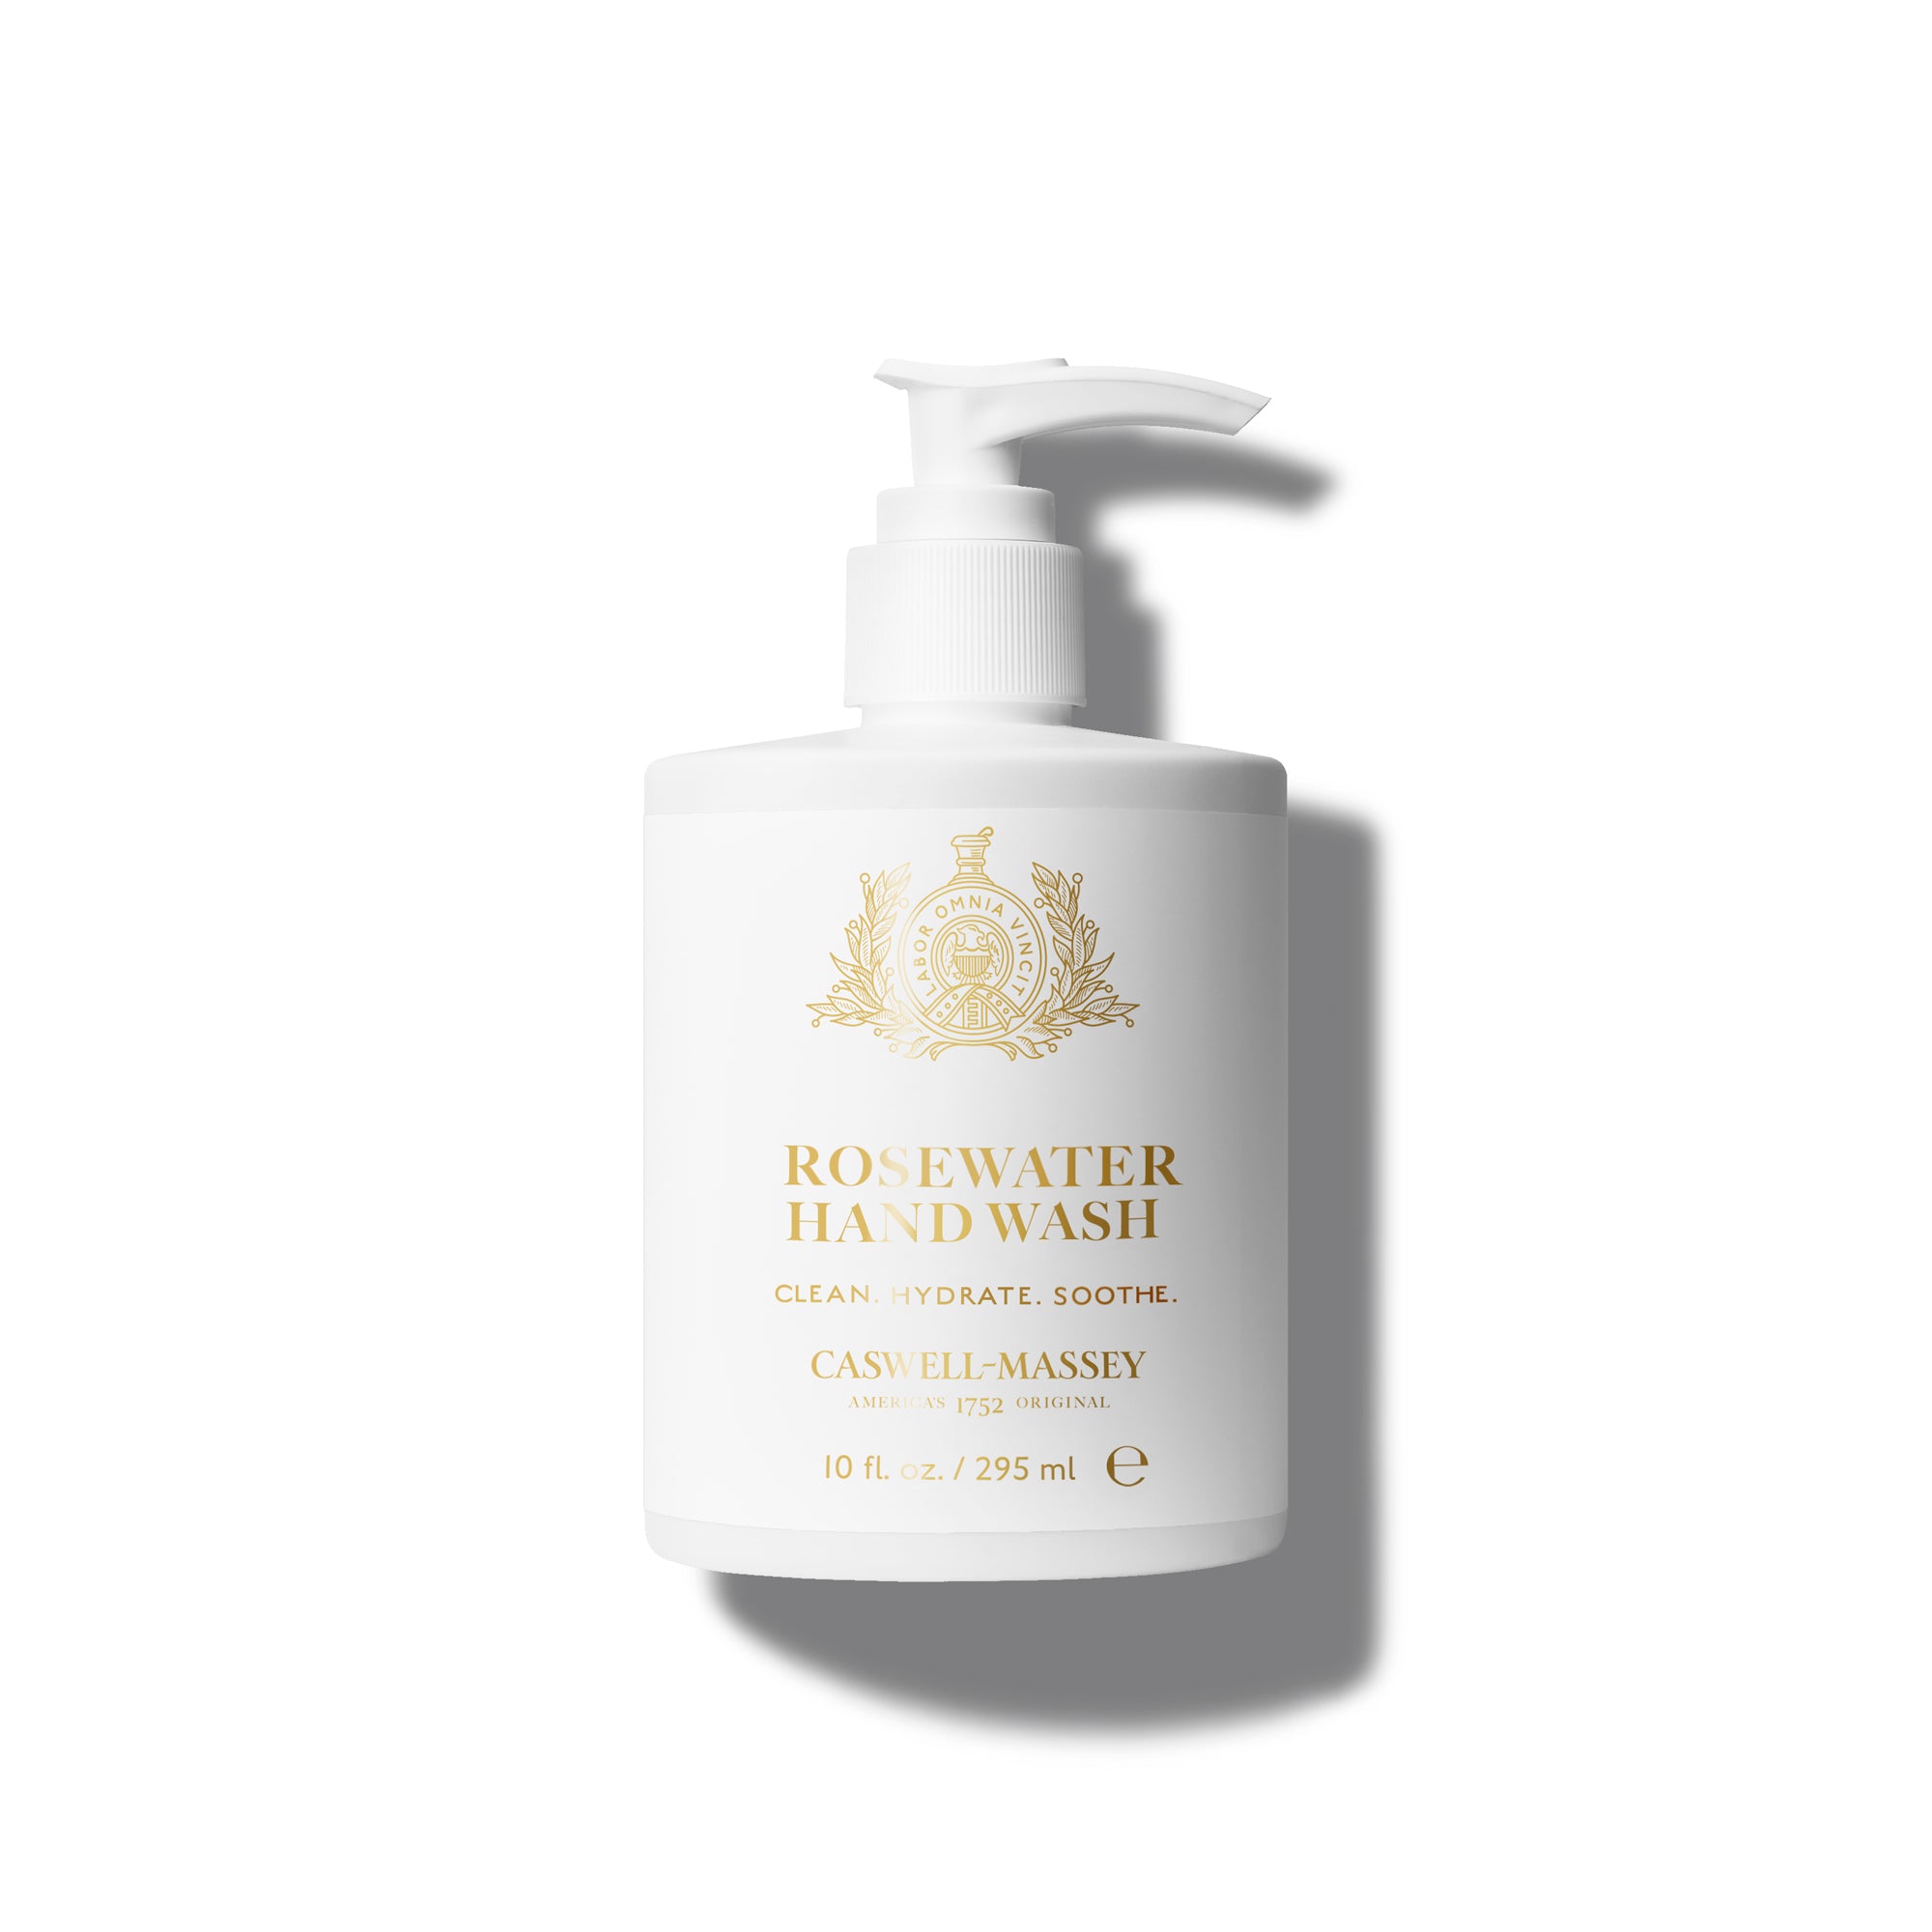 Rosewater Hand Wash Hand Soap Caswell-Massey®   